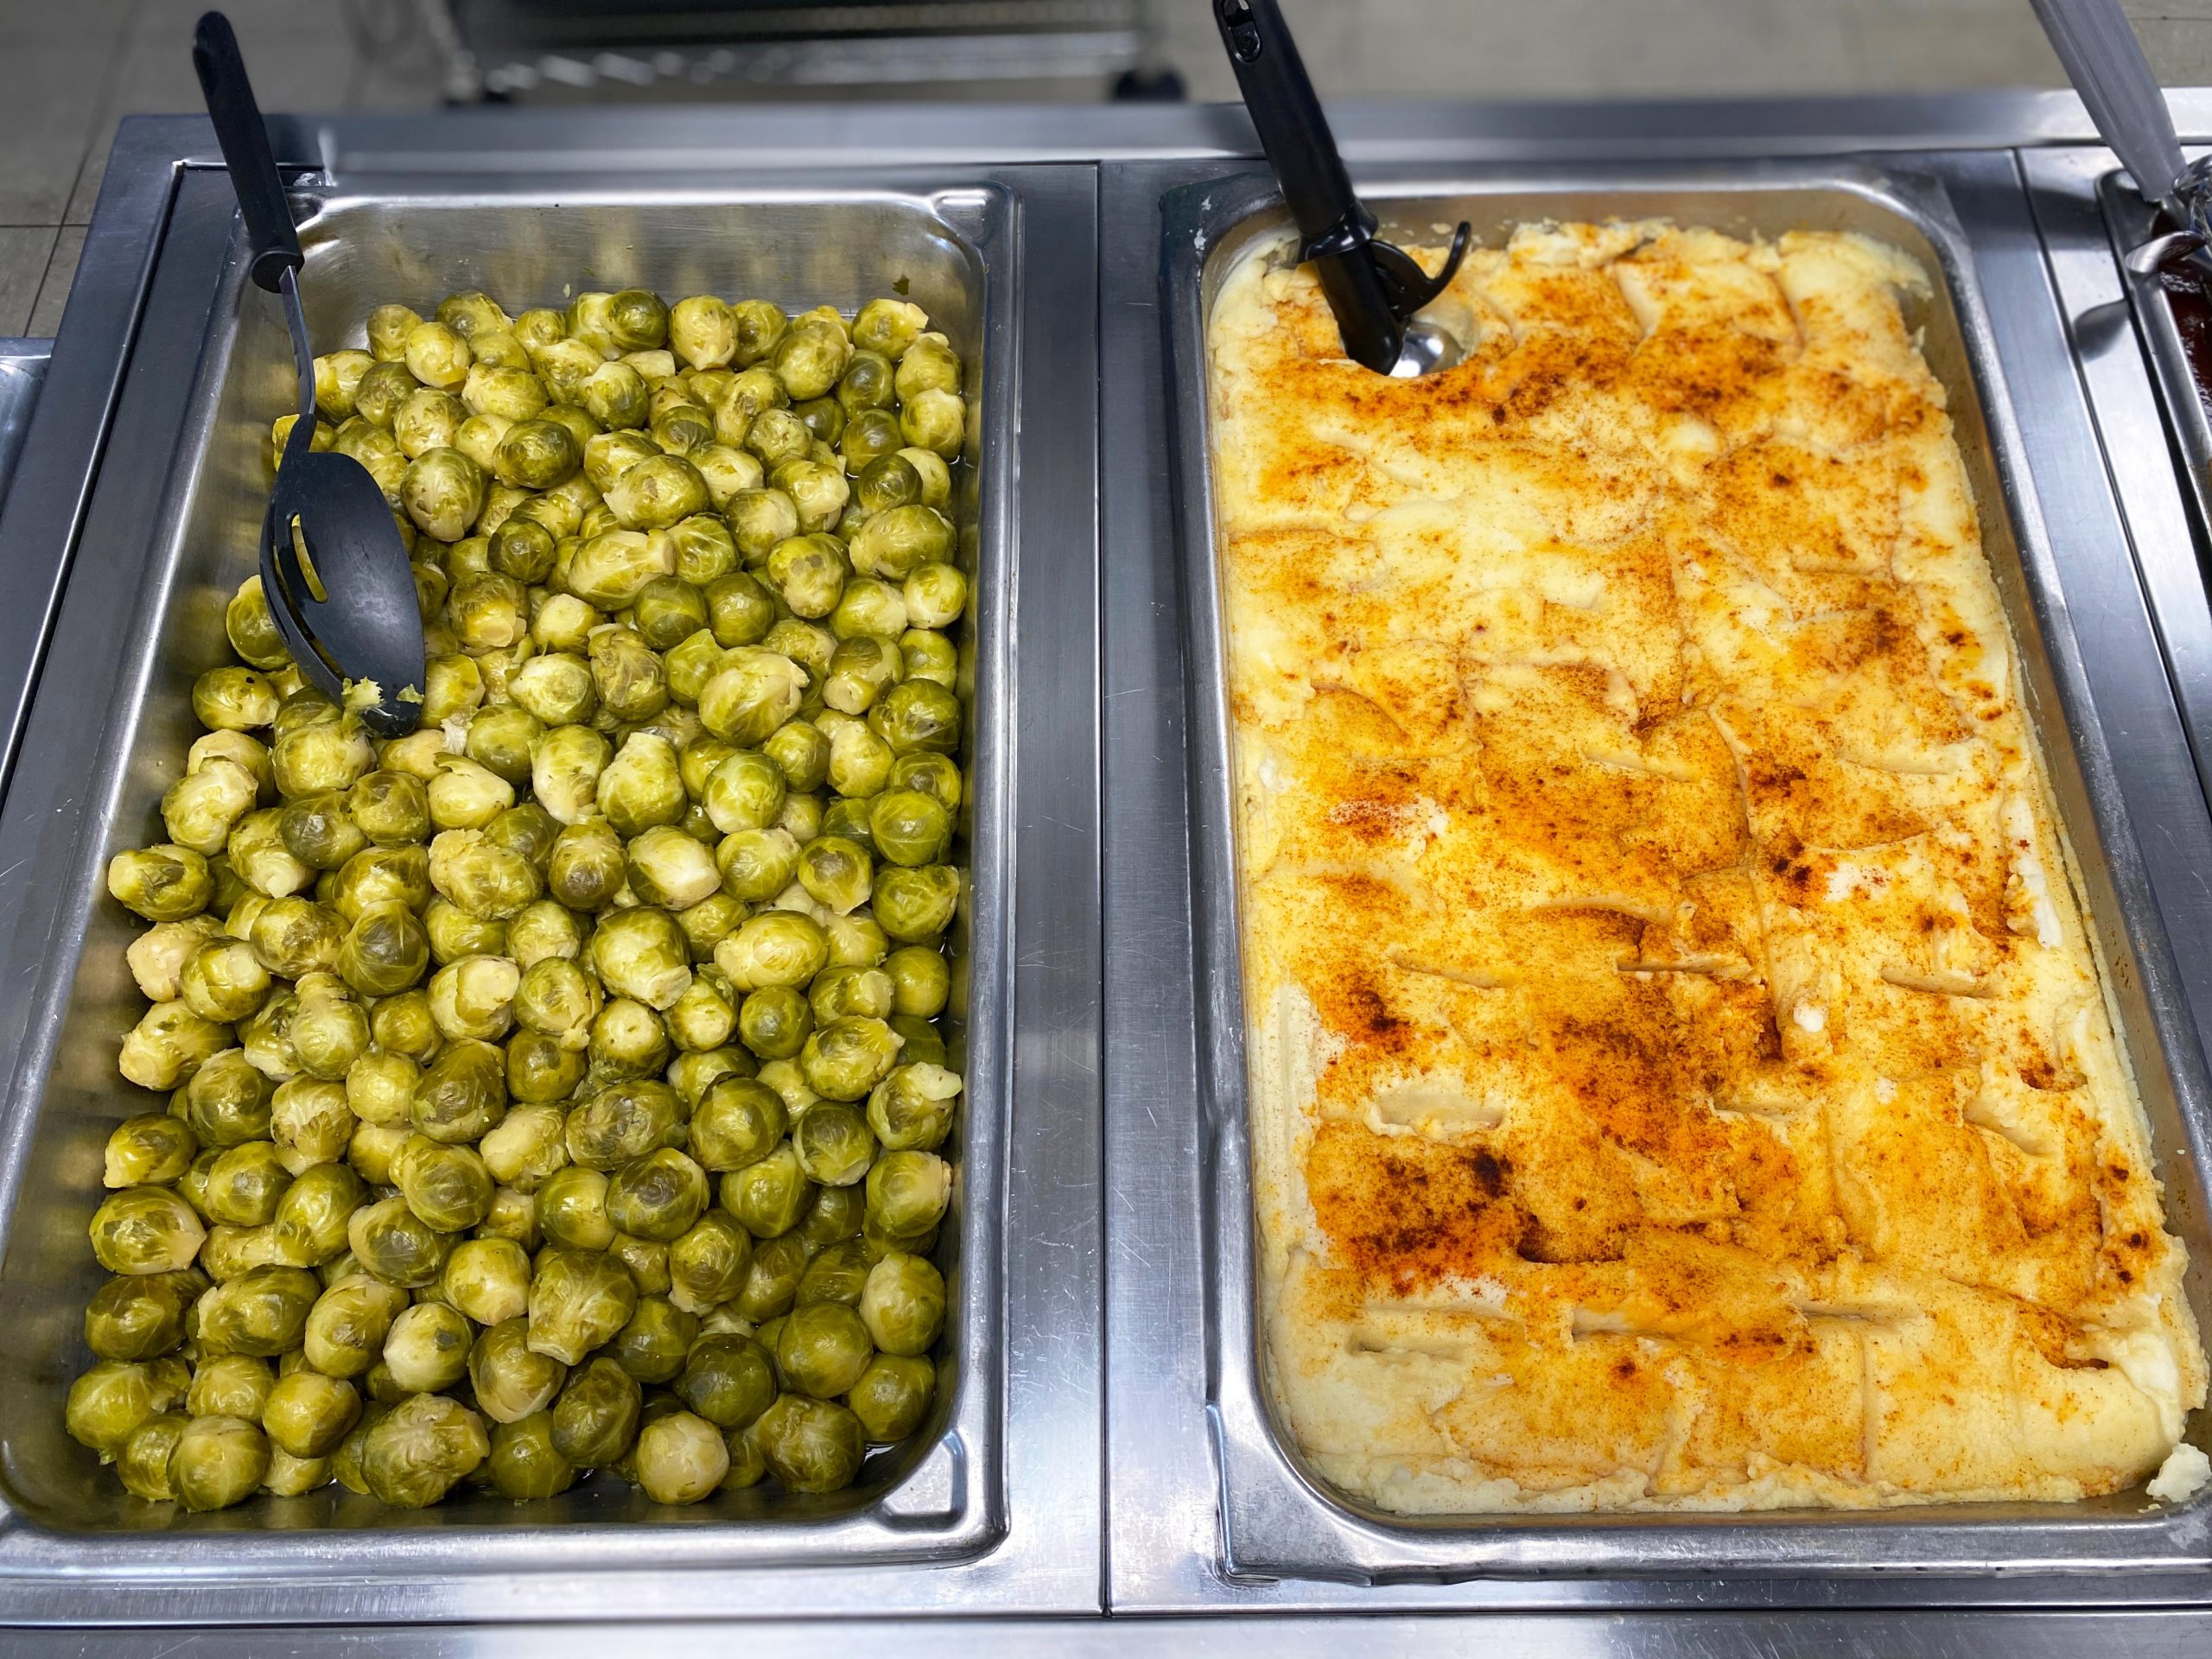 Brussel sprouts and mashed potatoes in serving trays